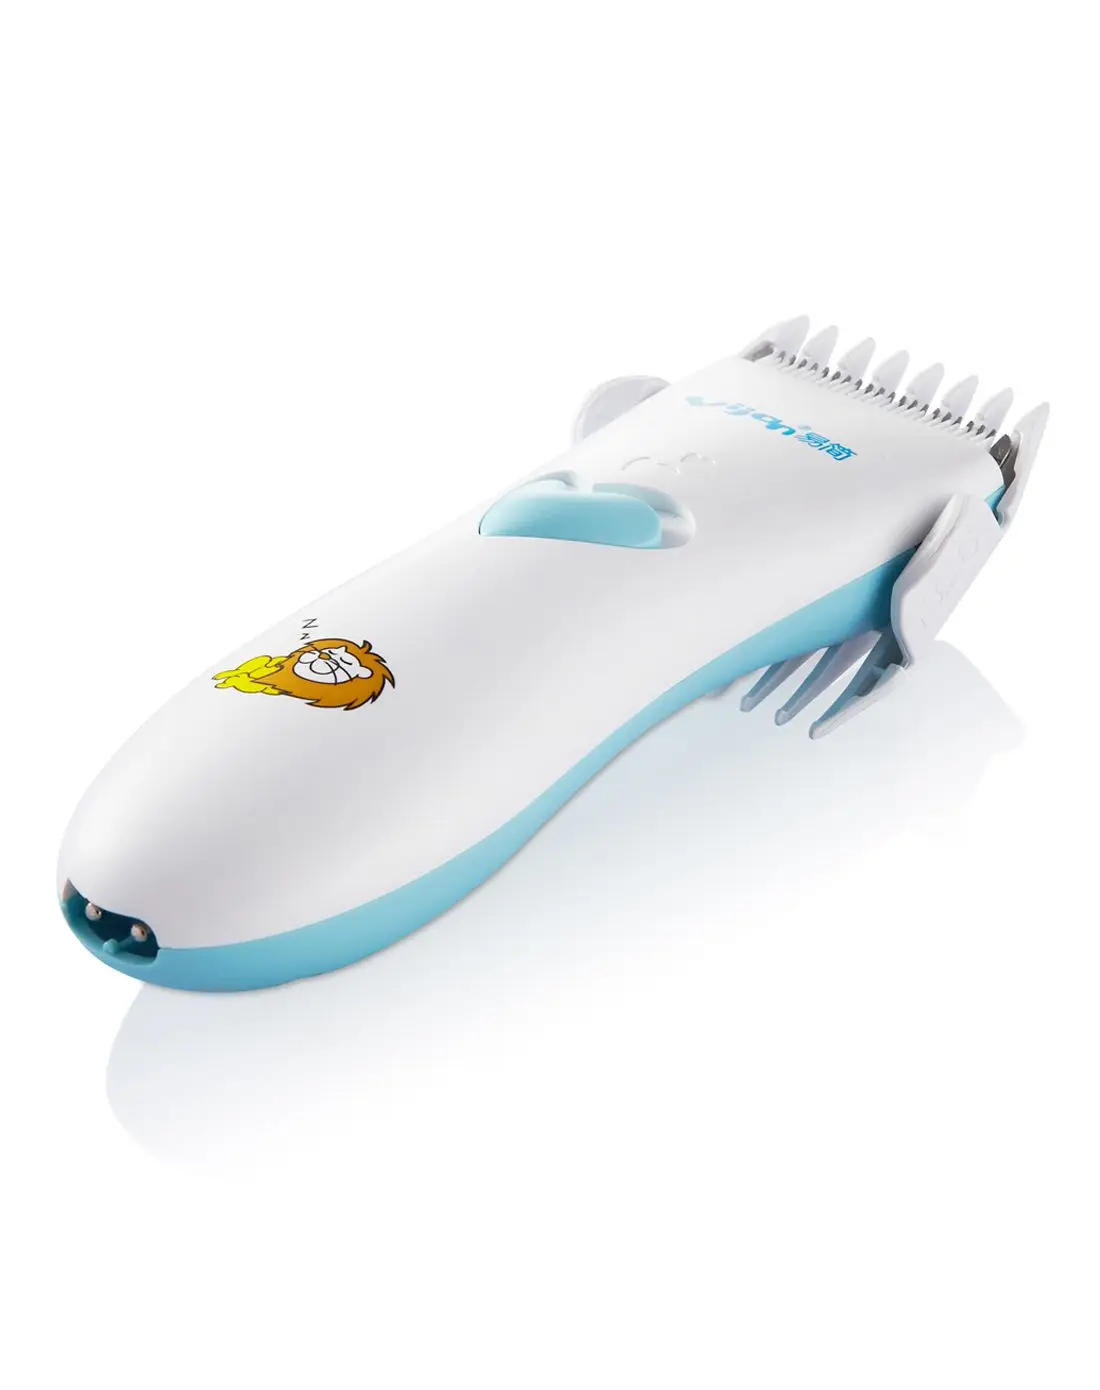 Professional ultra-quiet baby hair trimmer cordless